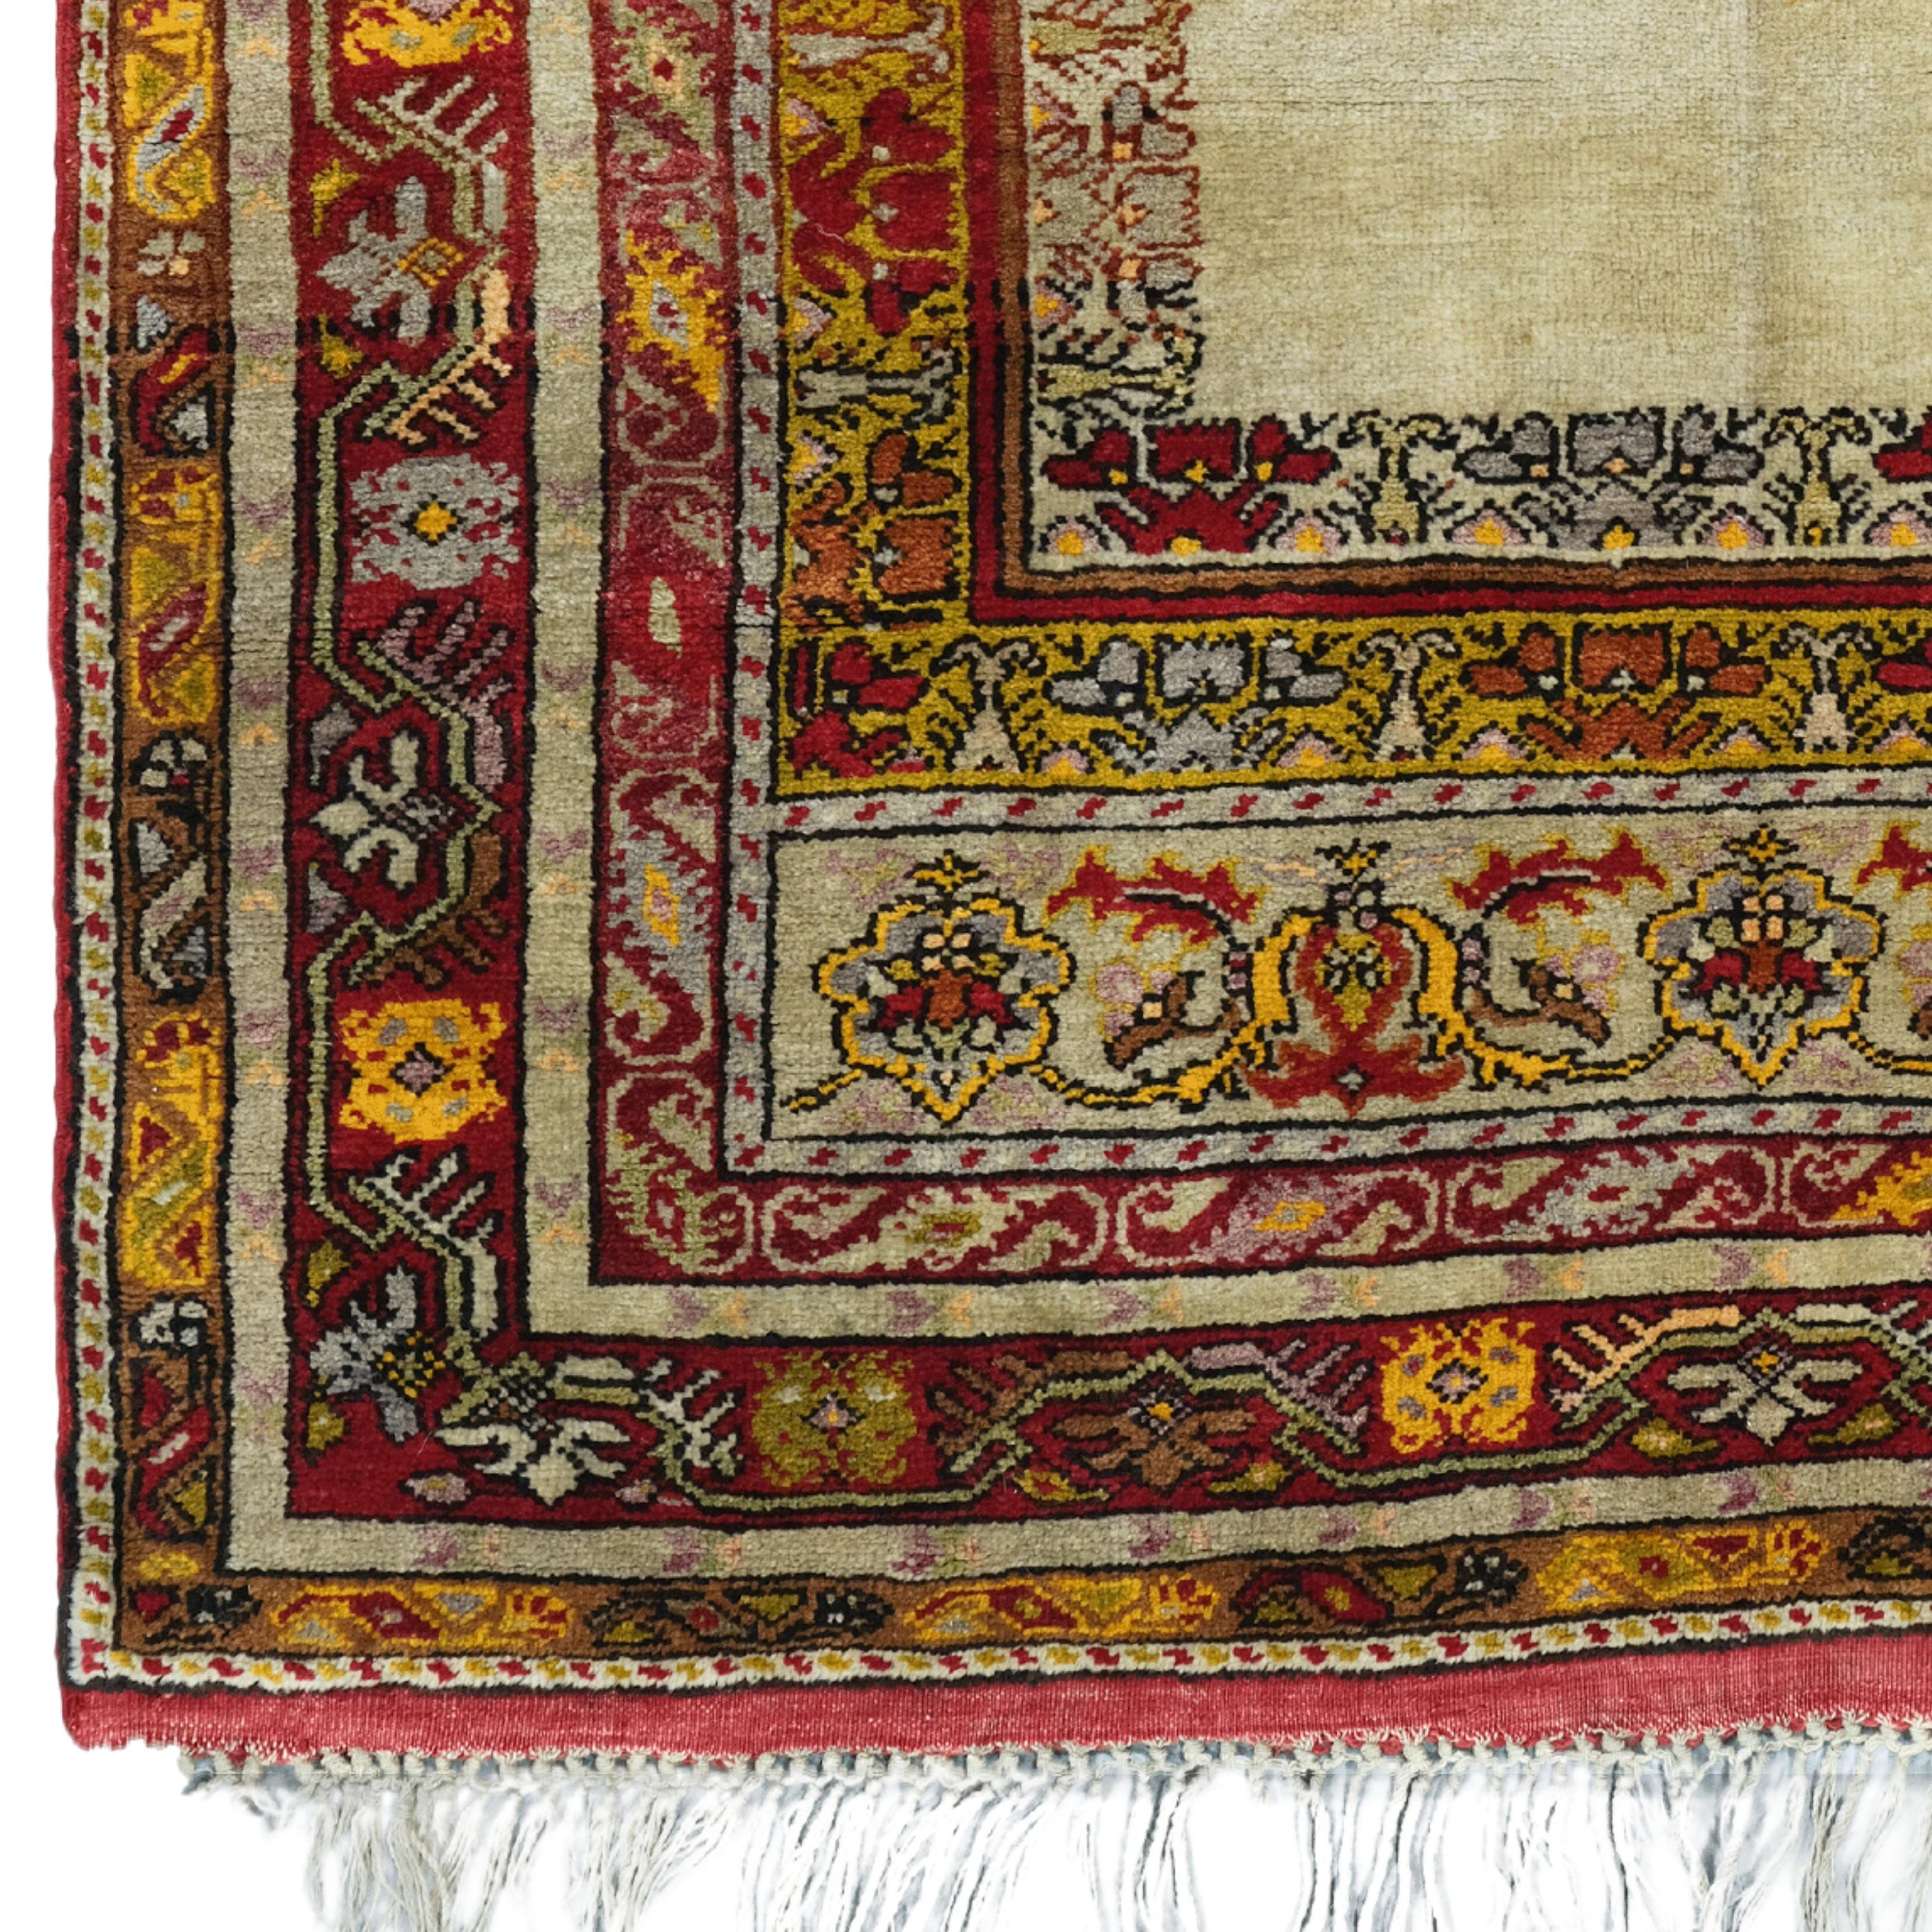 19th Century Antique Turkish Avanos Rug

This elegant antique Turkish Avanos carpet brings the elegance and craftsmanship of the 19th century to the present day. With its rich color palette and detailed patterns, this rare piece has the beauty and